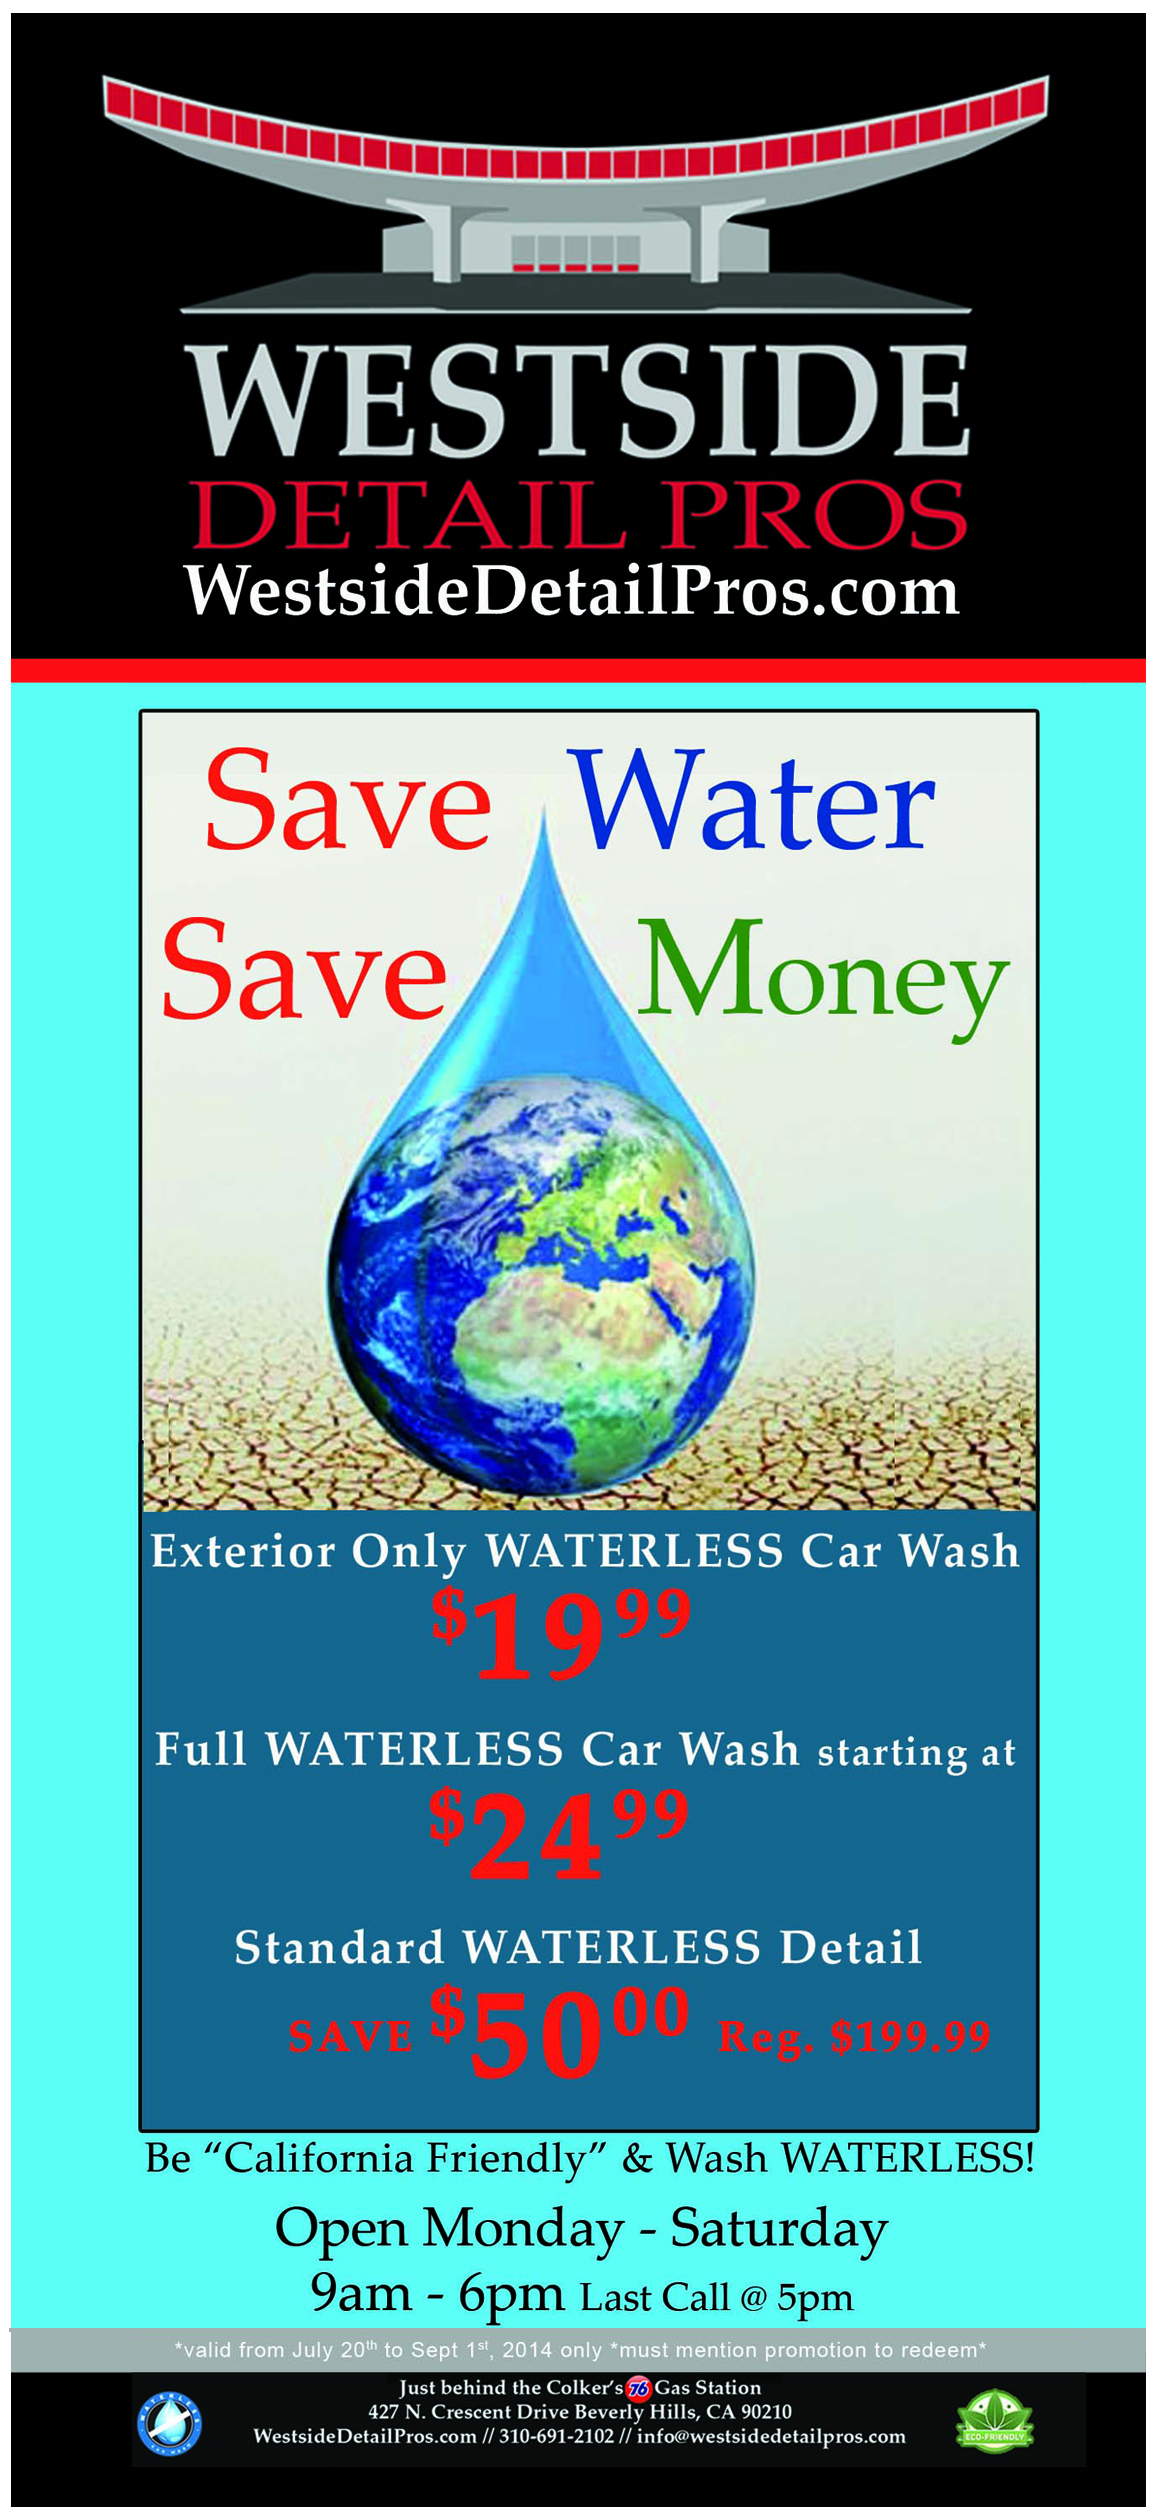 Save Money and Save Water